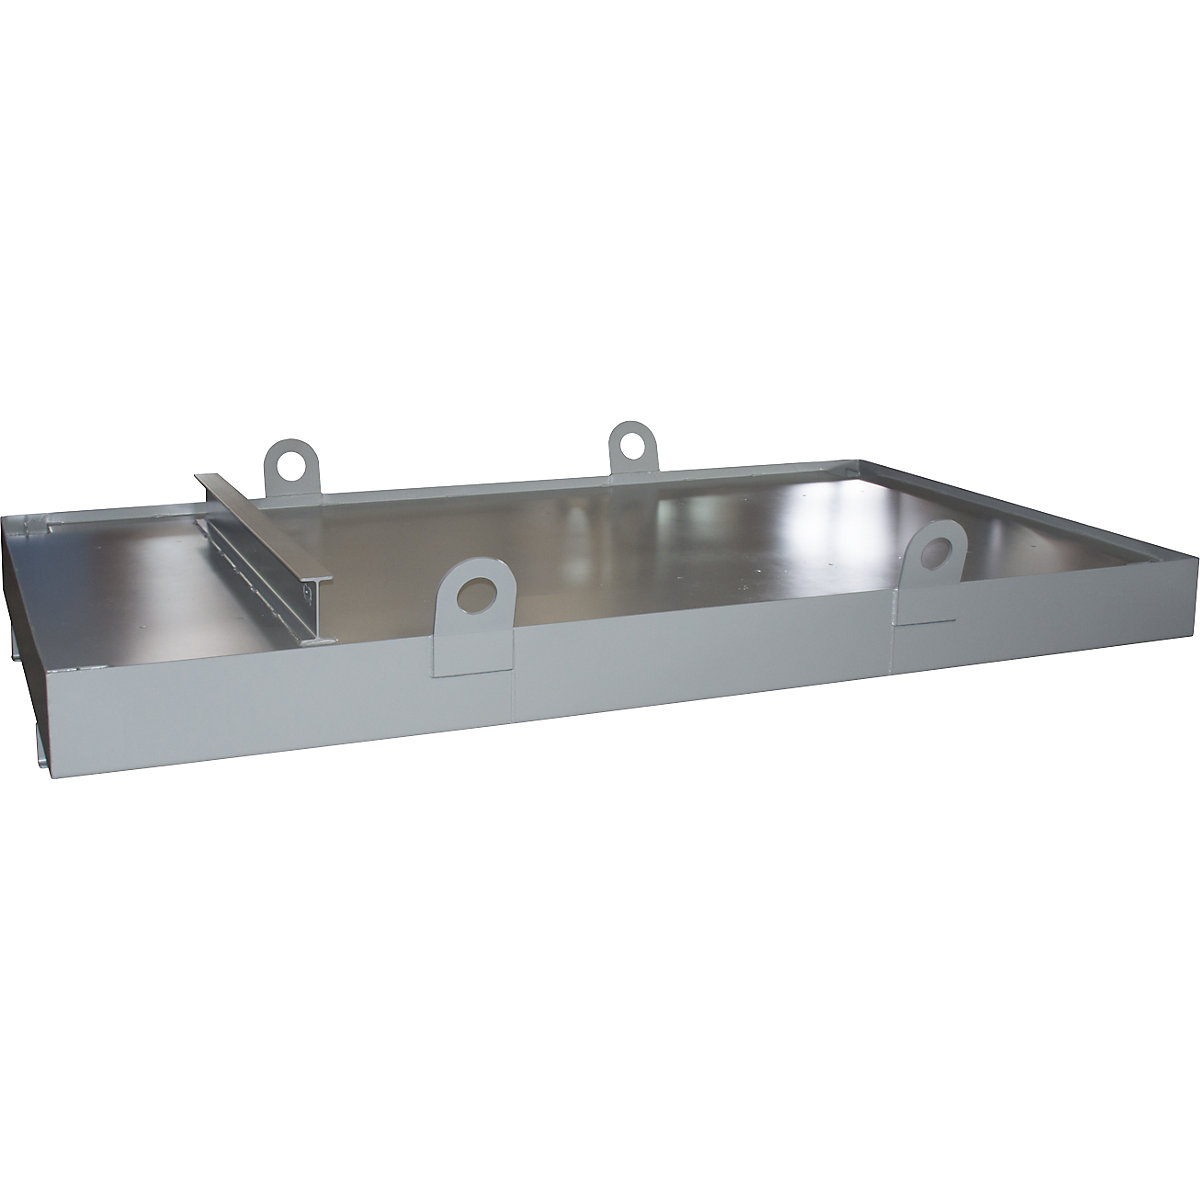 Sump tray for skip trailer – eurokraft pro, for skip trailers, sump capacity 1276 l, grey-7